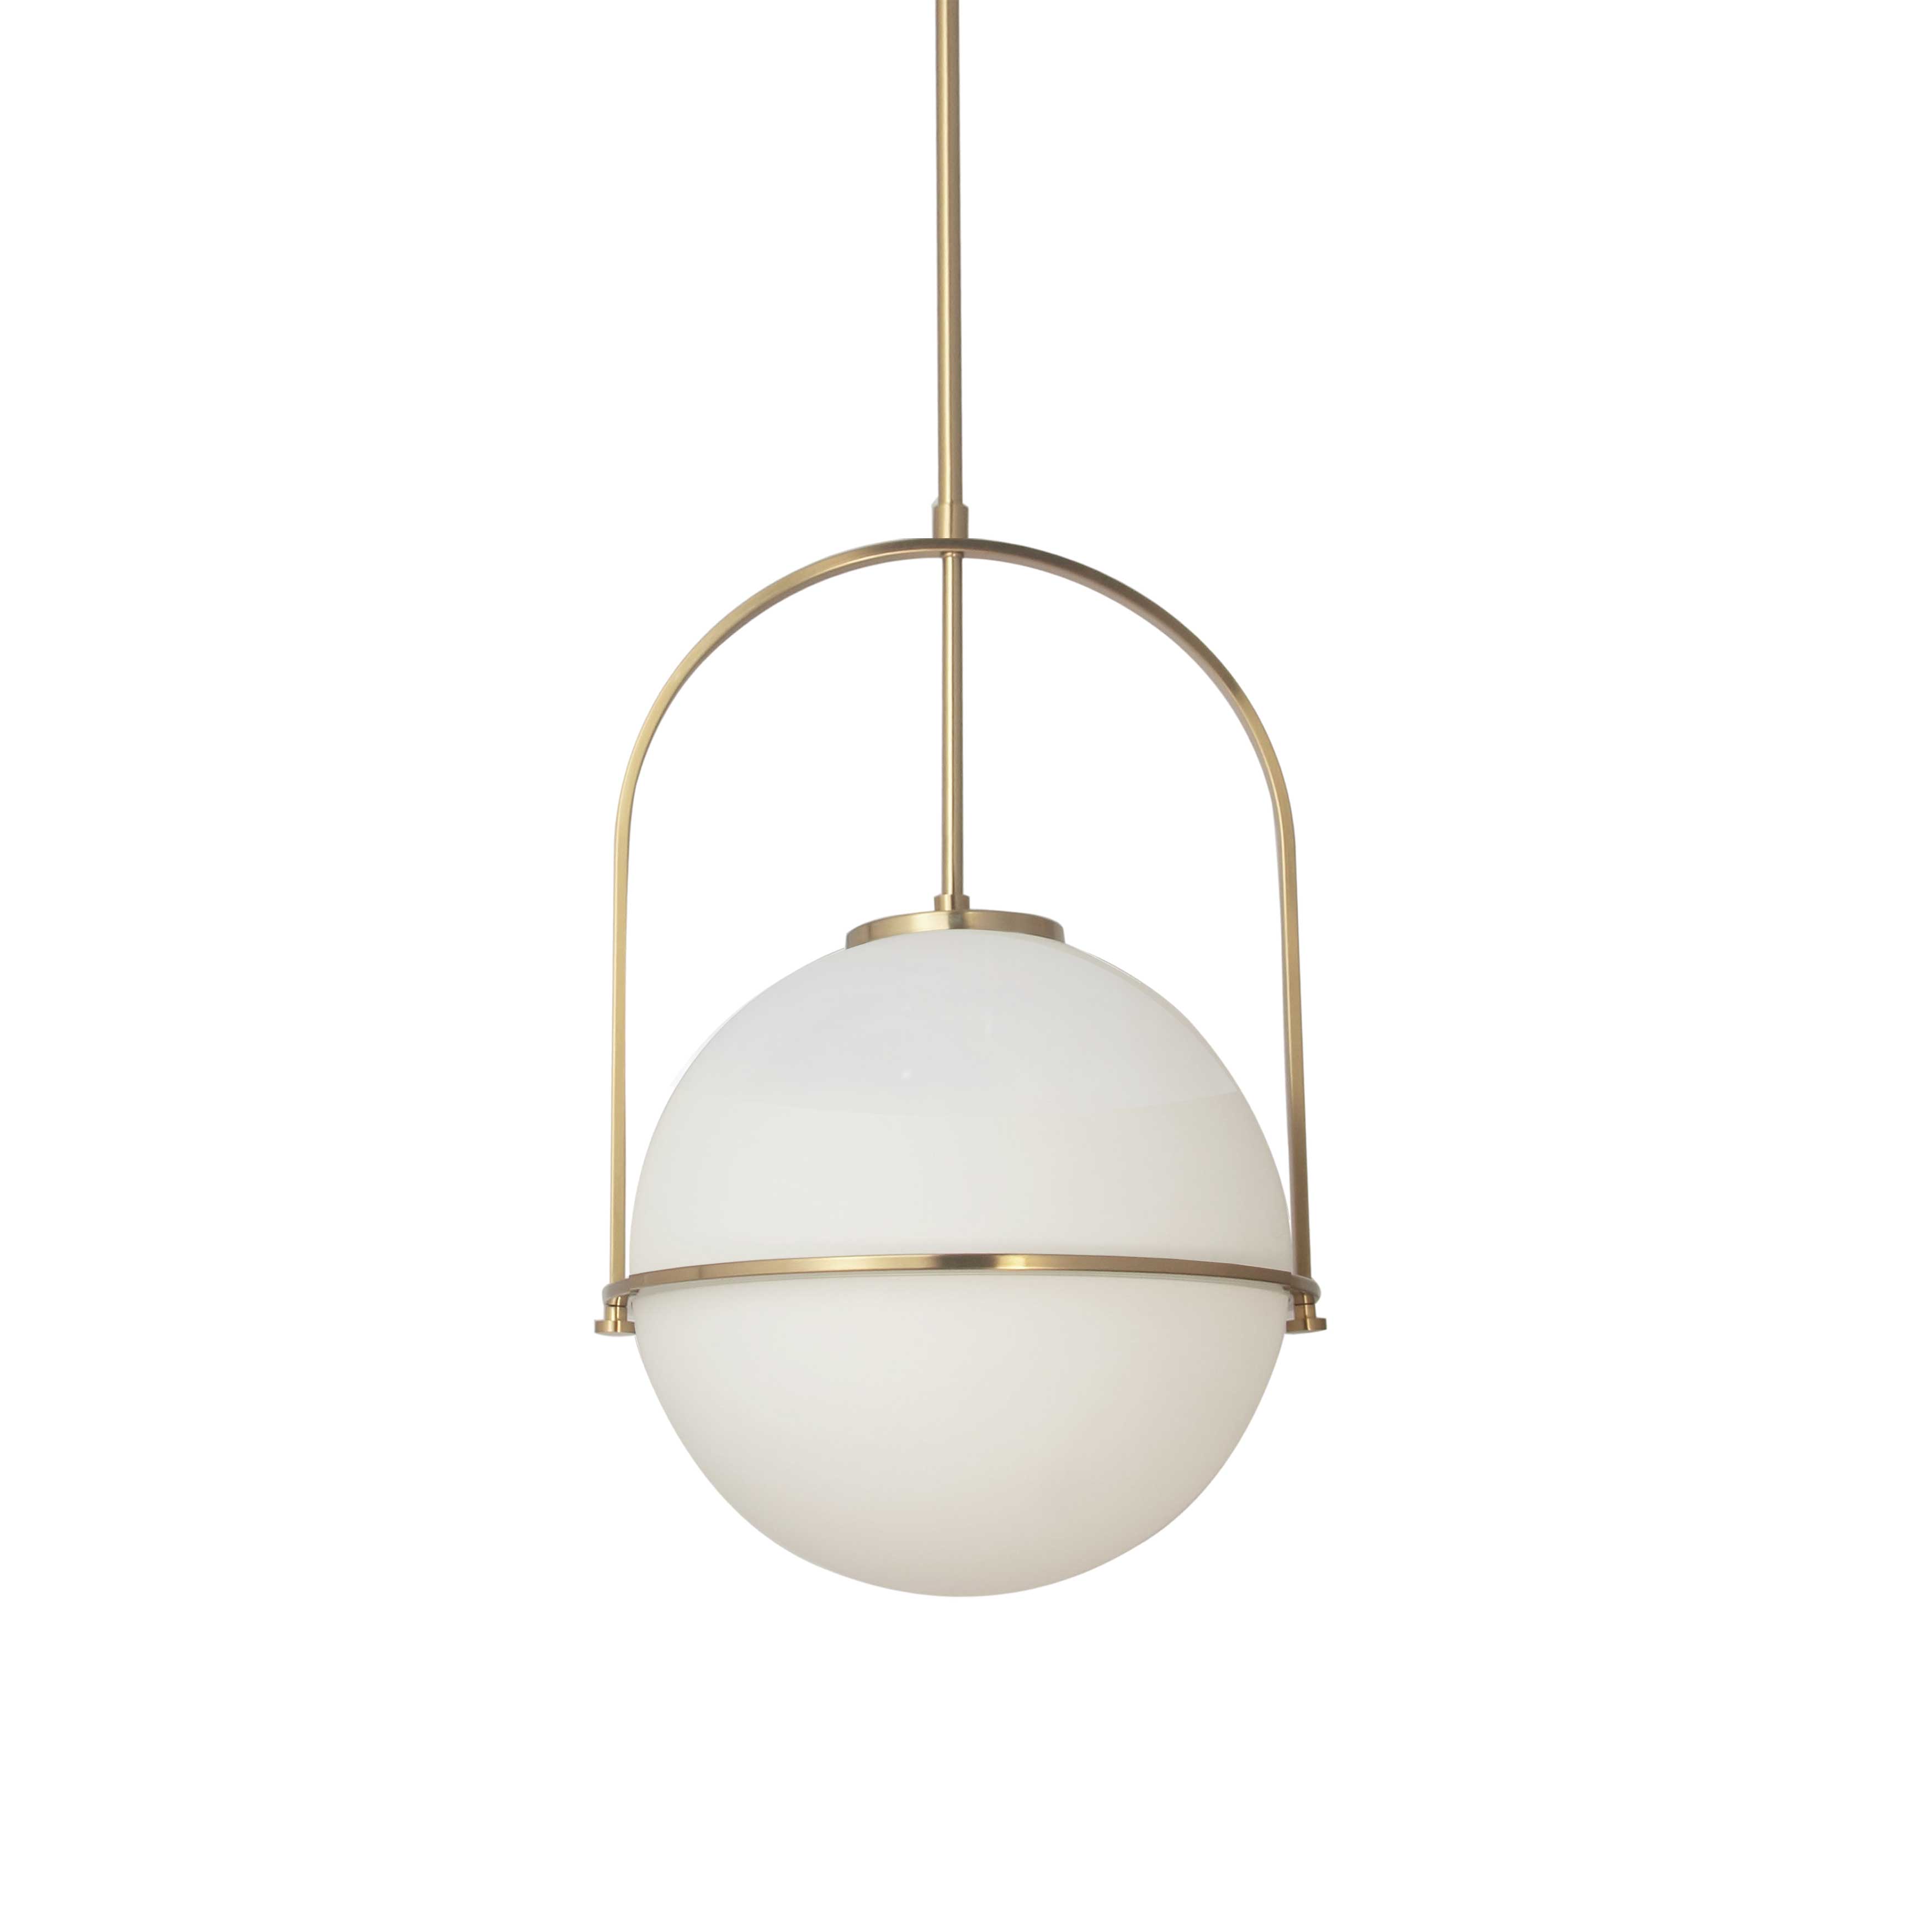 The Paola family of lighting incorporates a thoroughly up to date aesthetic in a clean geometric design. Linear elements soften the impact of a large globe at the center of the fixture. A metal frame in your choice of finish circles around an opal glass globe, casting soft, skin-friendly light. Another arm of the frame circles back over the globe, creating a longer drop profile. Paola lighting adds a focal point to a foyer or hallway, and welcome curves to a kitchen or dinette.